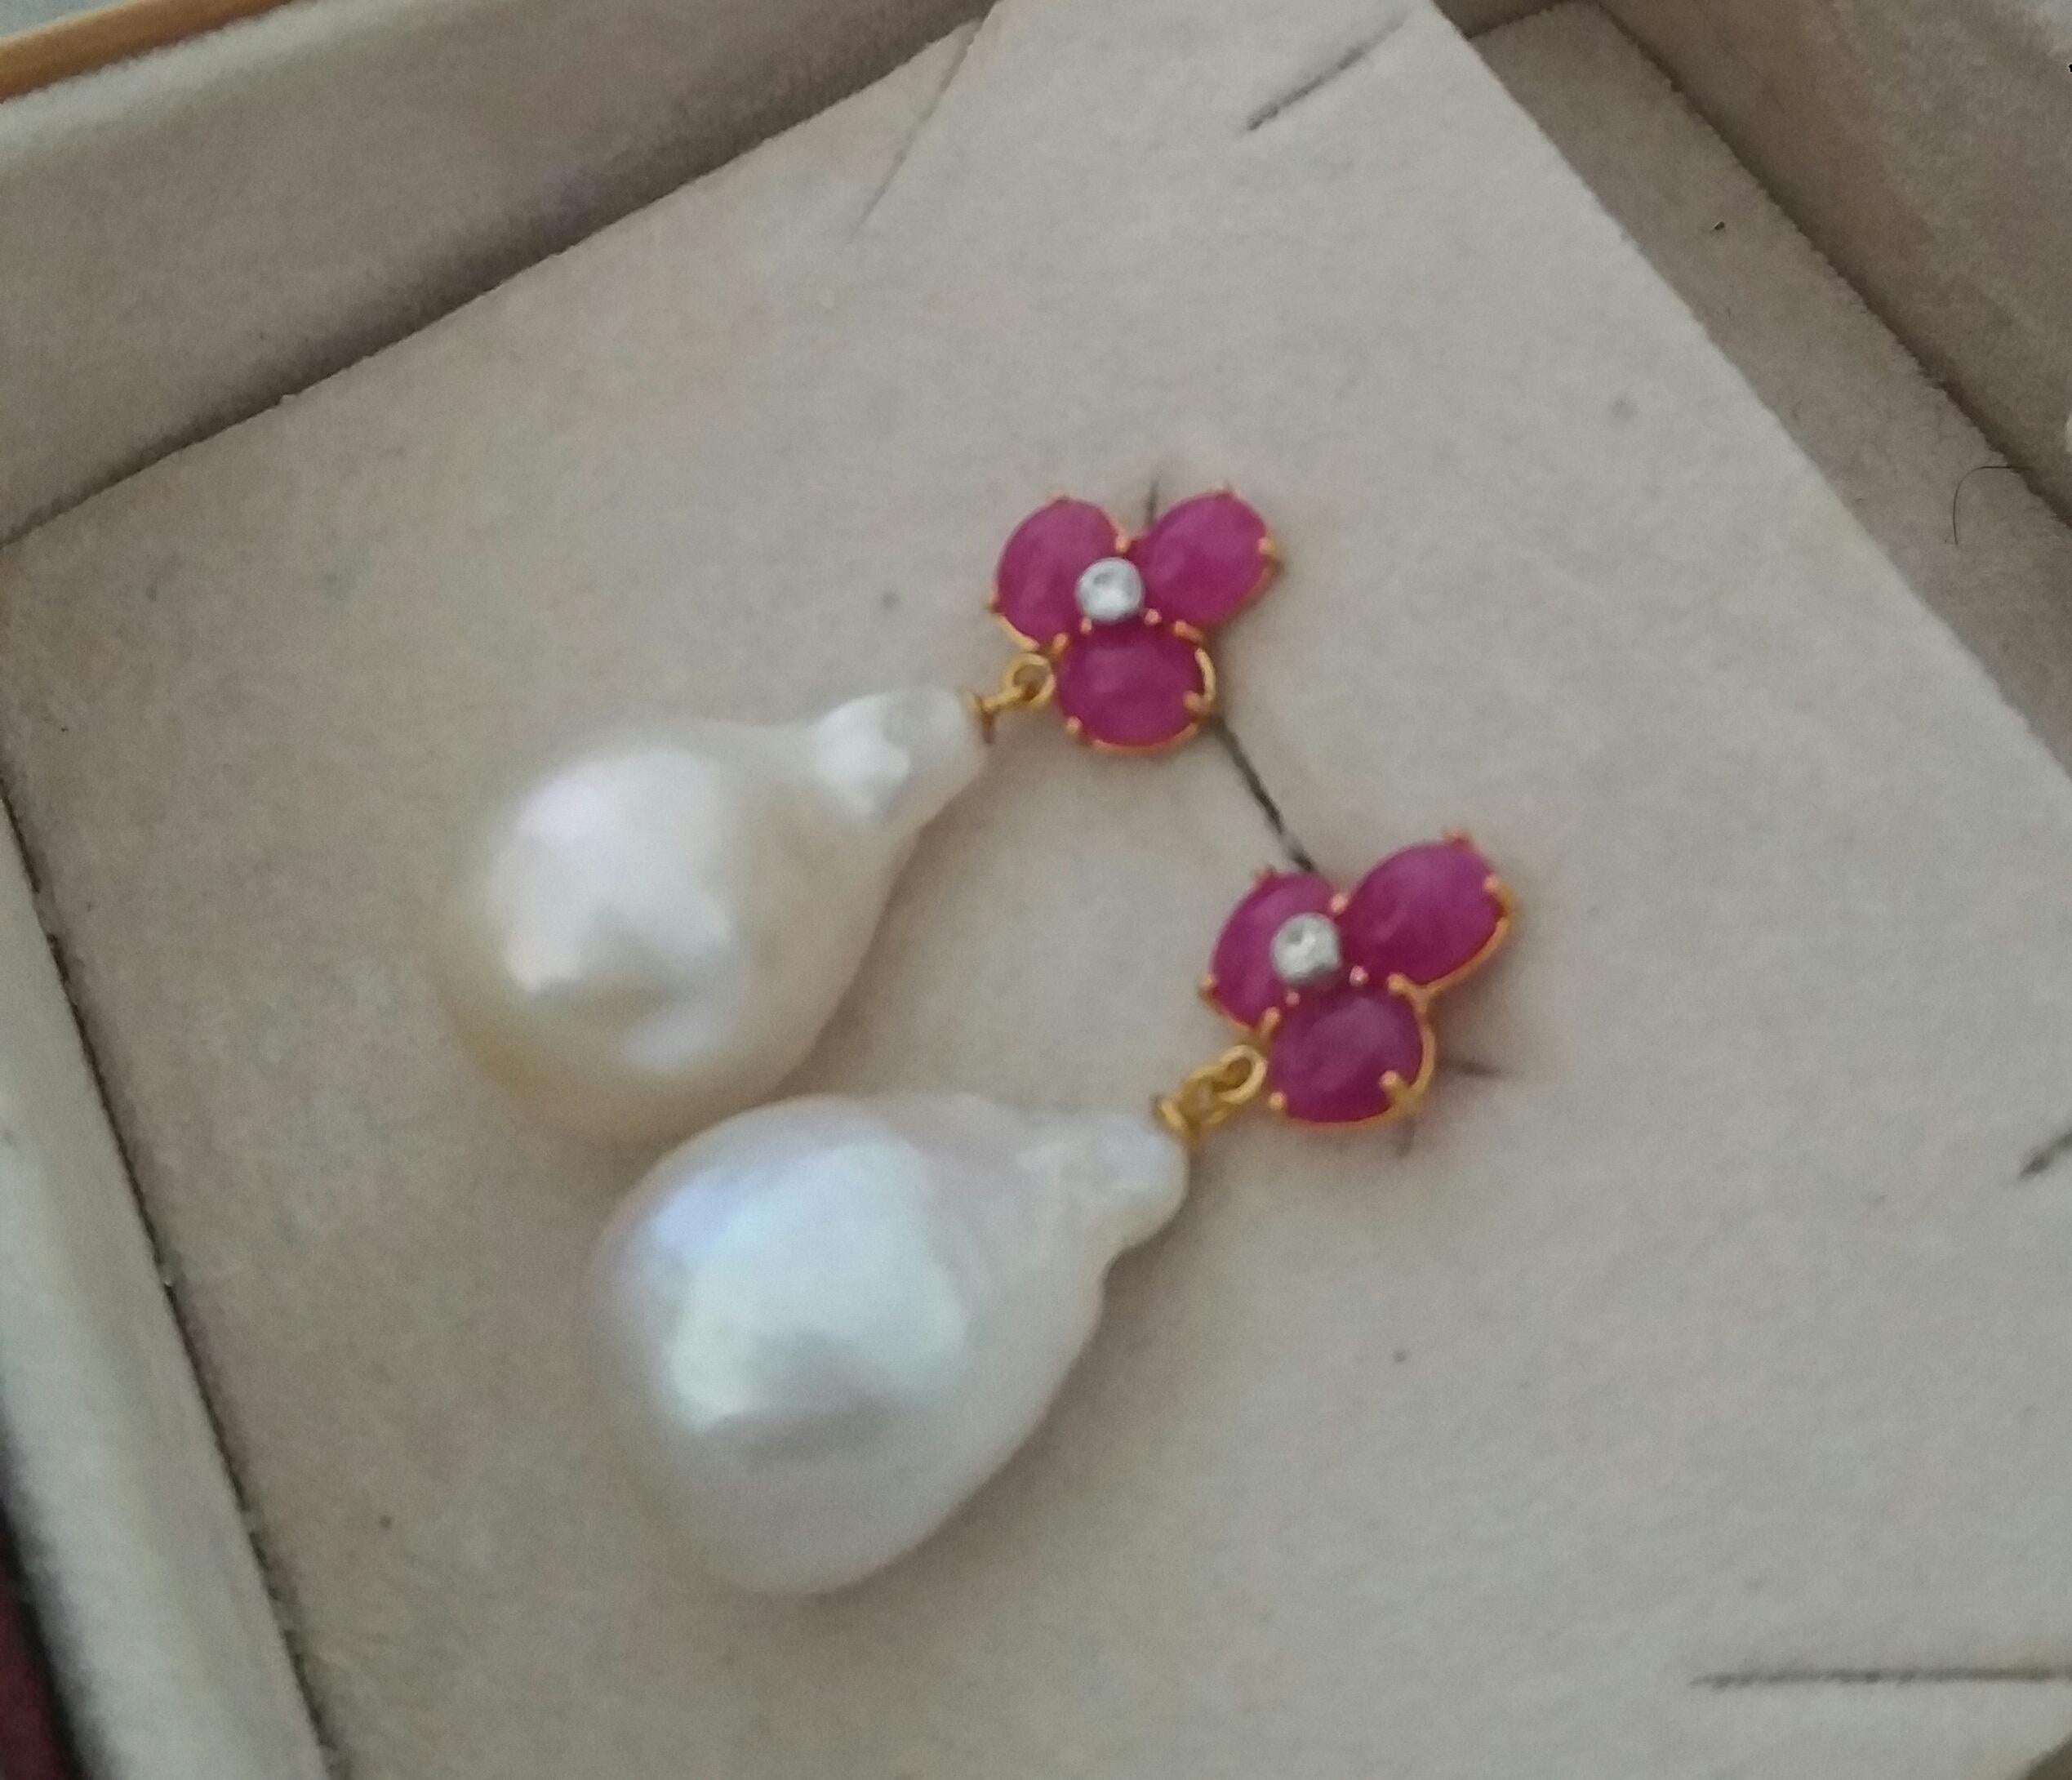 3 Ruby Oval Cabs Gold Diamonds White Pear Shape Baroque Pearls Earrings 2